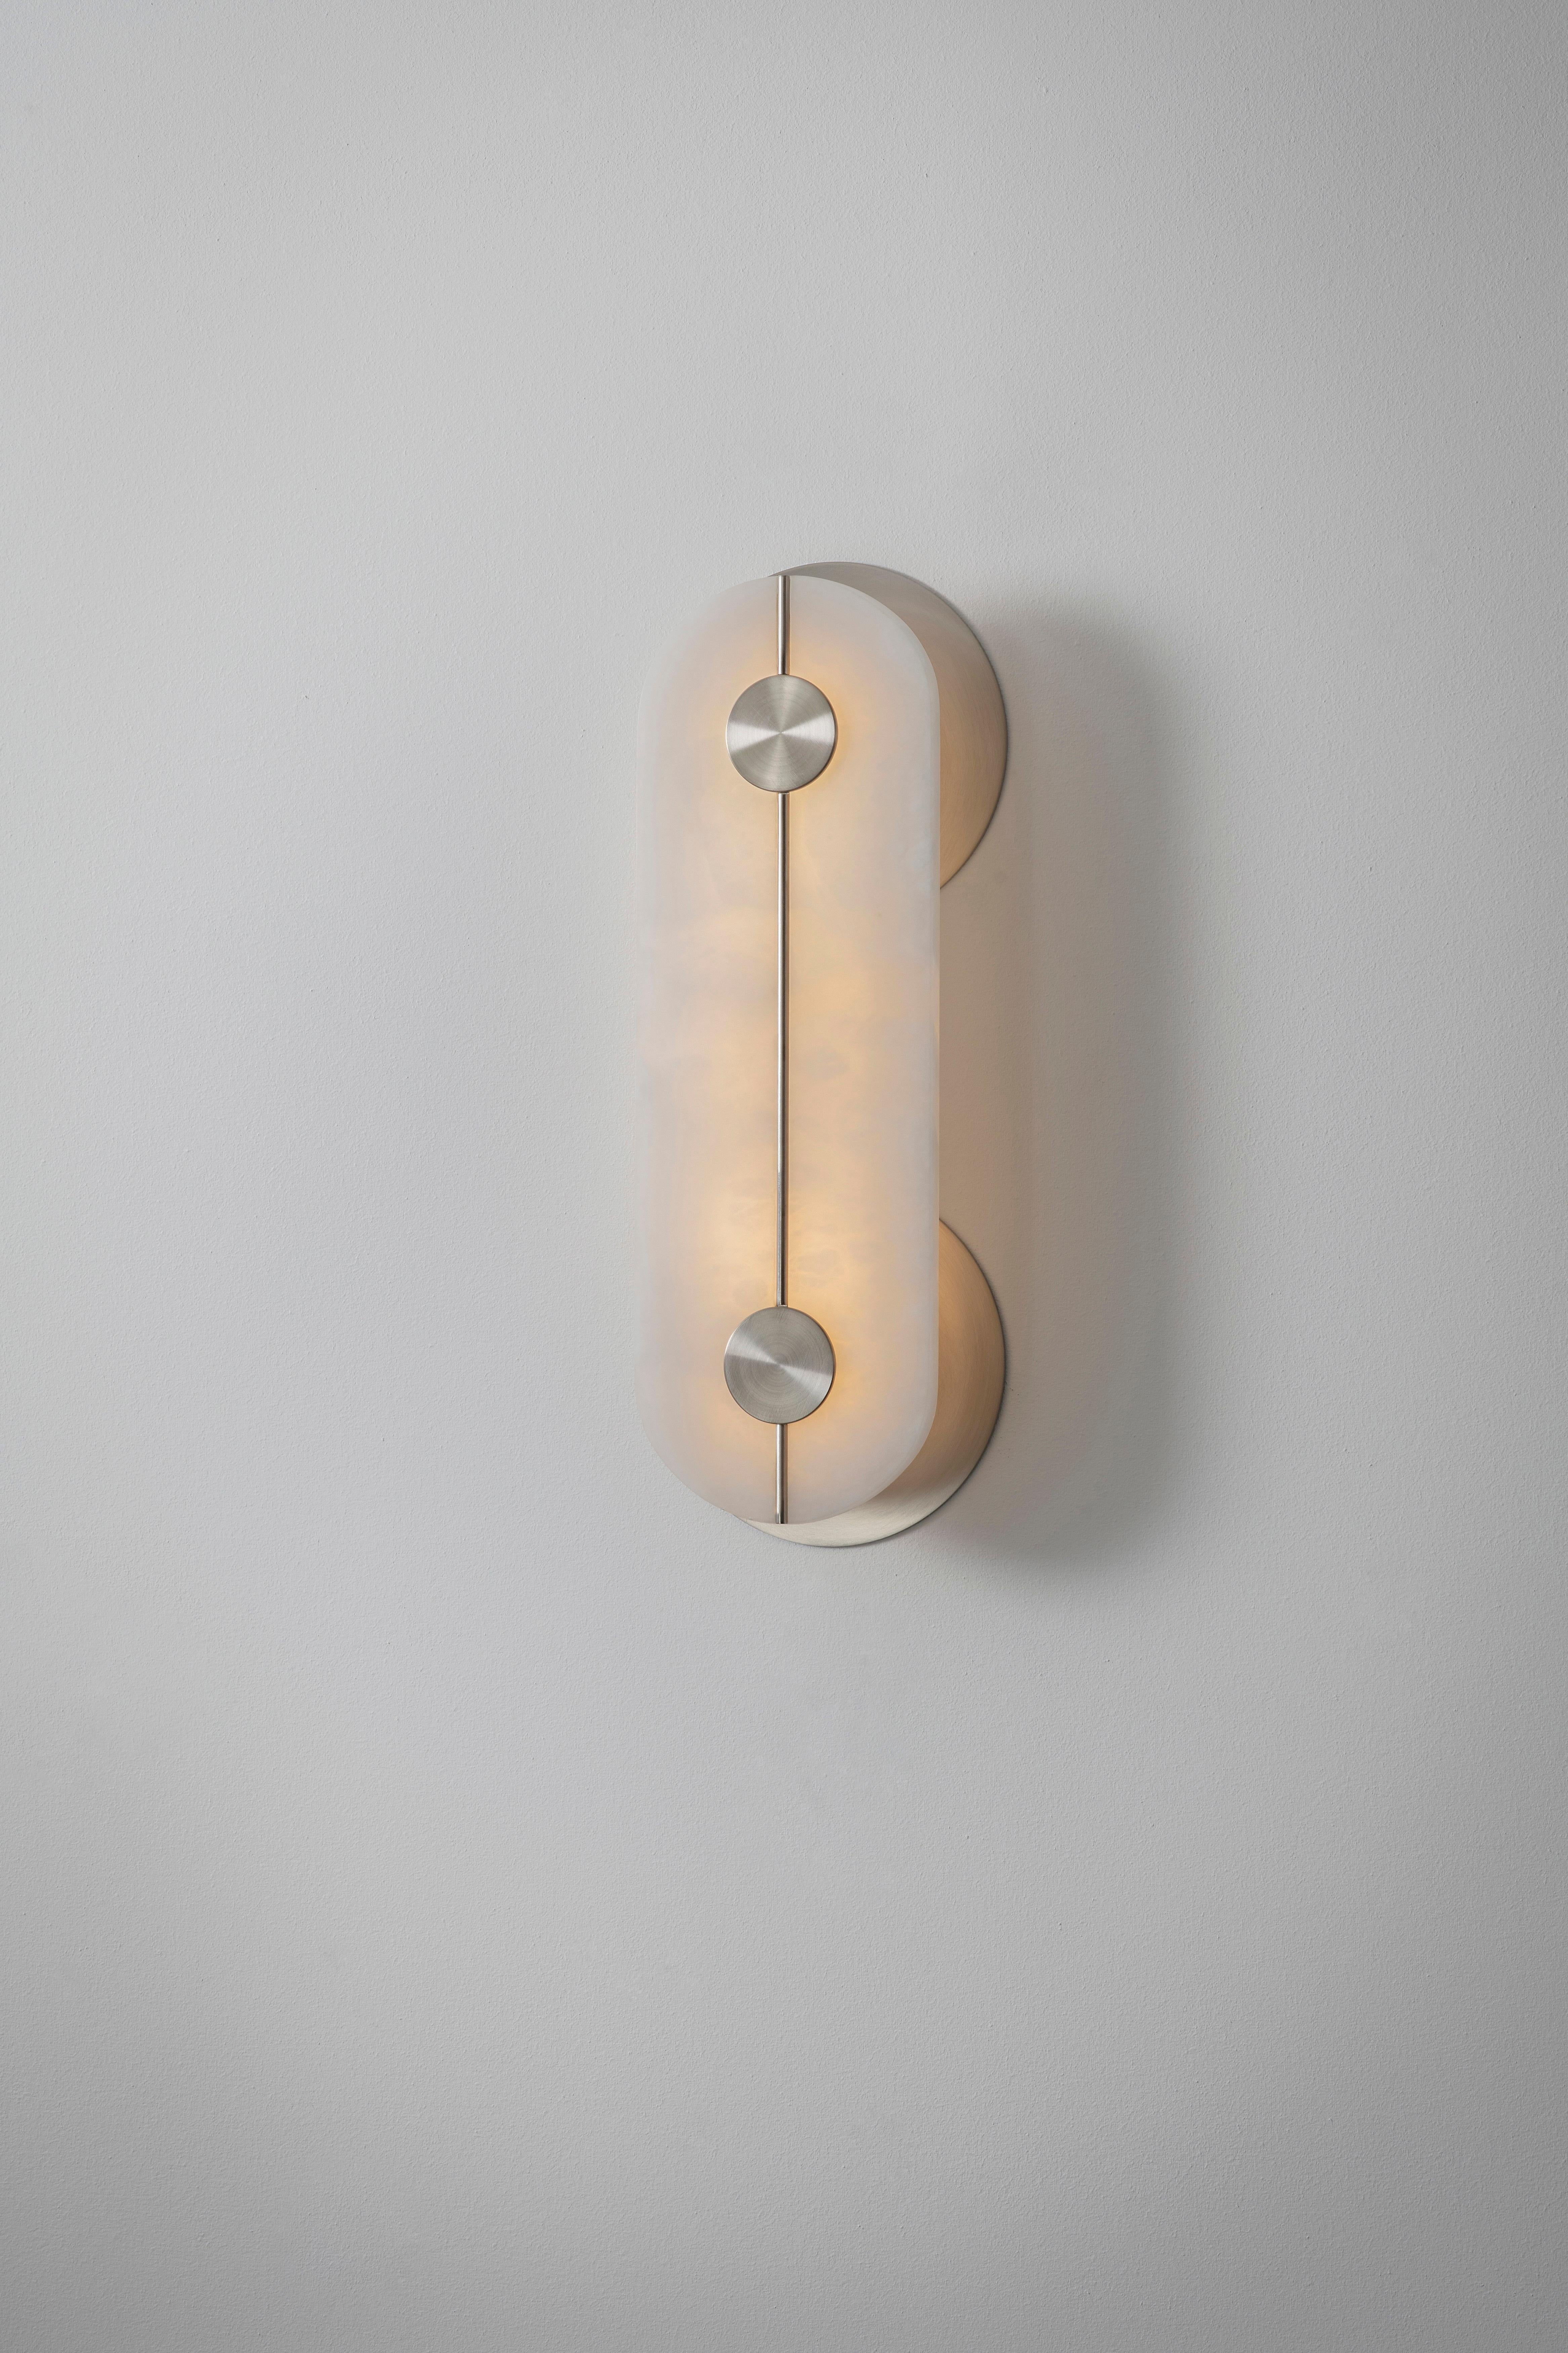 Brace wall light nickel small by Bert Frank
Dimensions: 7 x 16 x H 43 cm 
Materials: Nickel, Alabaster


All our lamps can be wired according to each country. If sold to the USA it will be wired for the USA for instance.

When Adam Yeats and